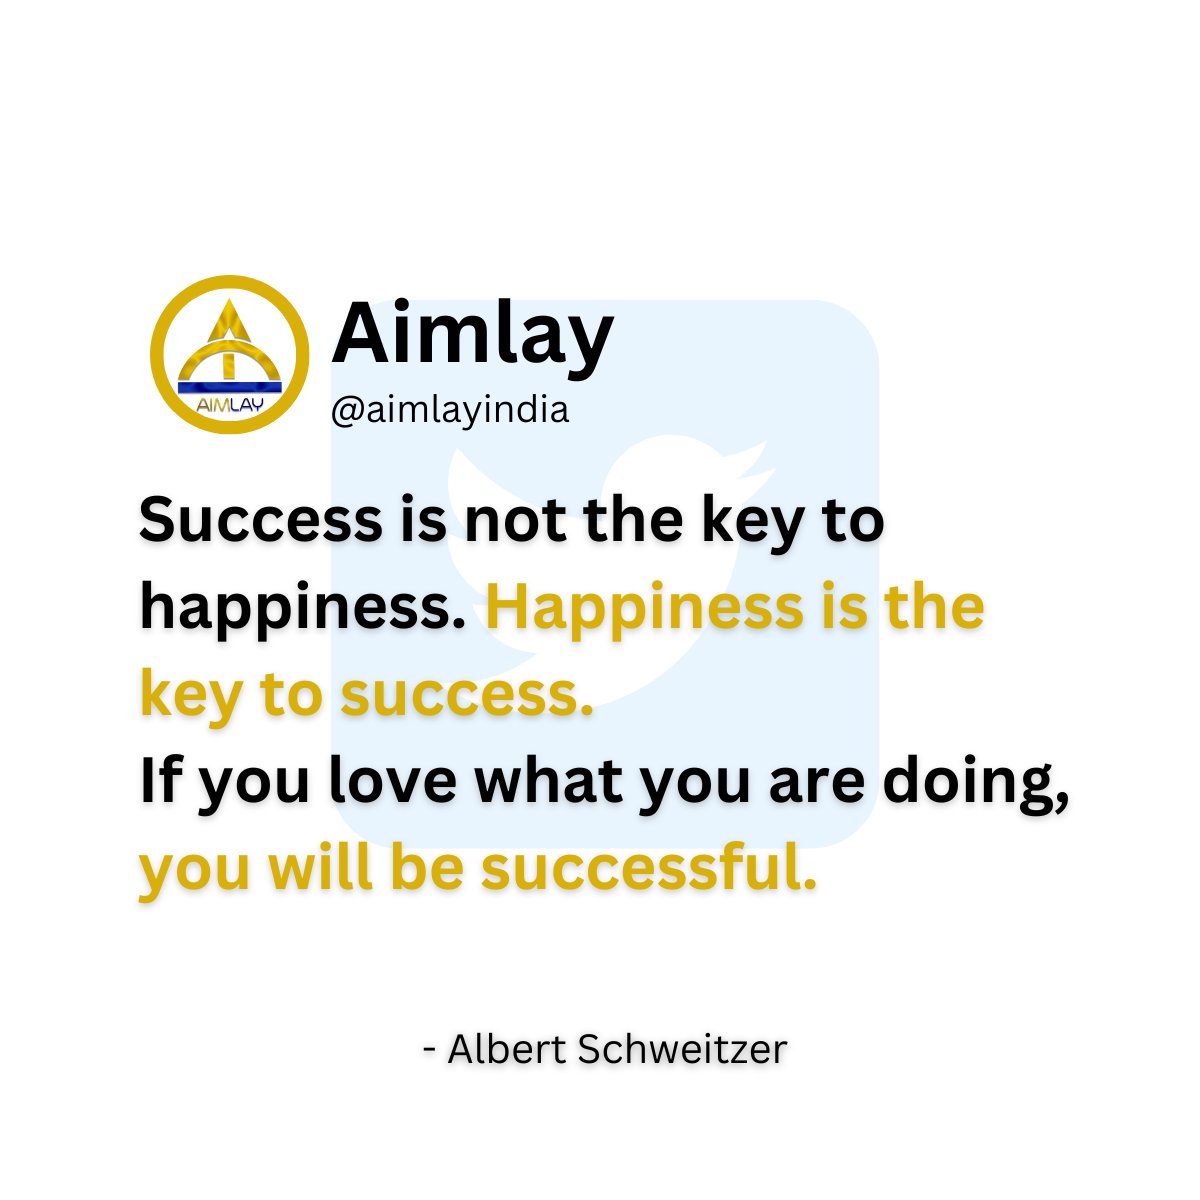 Happy Monday to all. 🏆

#mondaymotivation #mondaythoughts #aimlay  #companyculture #companygrowth #corporatelife #workculture #loveandkindness #kindnessmatters  #successmindset #successful #happinessatwork  #motivationalpost #motivationmonday #mondaymood #mondaymorning